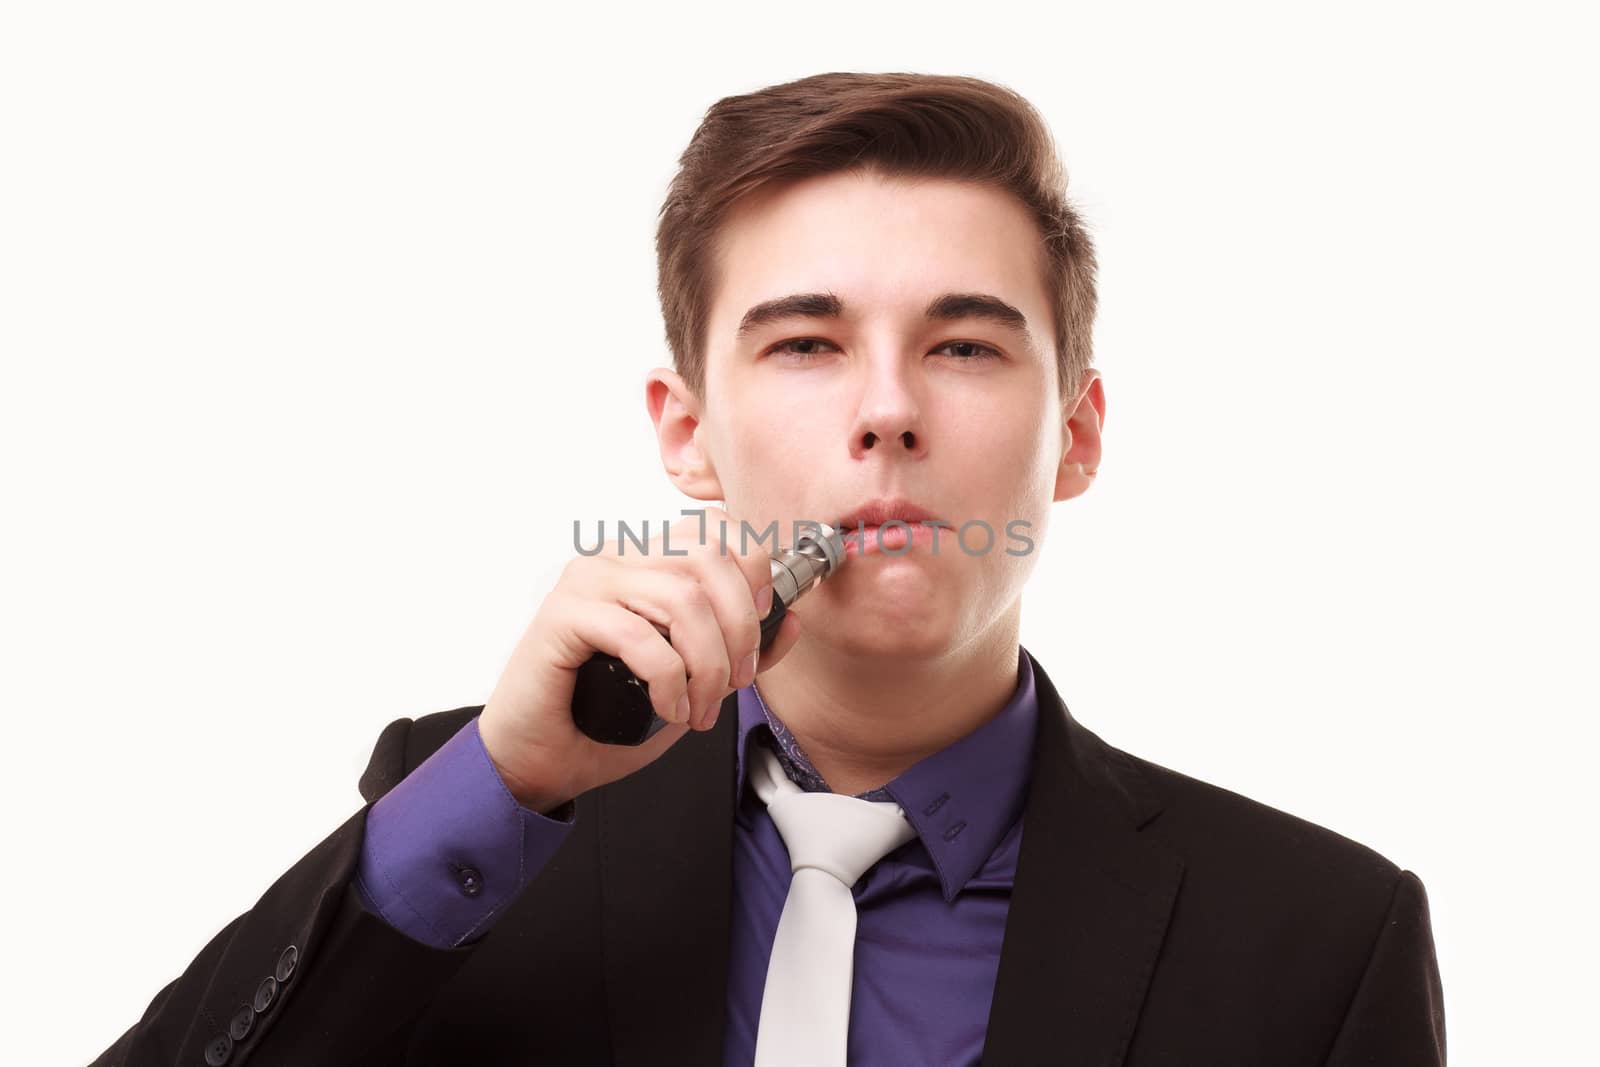 Portrait of a man in suit smoking an e-cigarette isolated on white